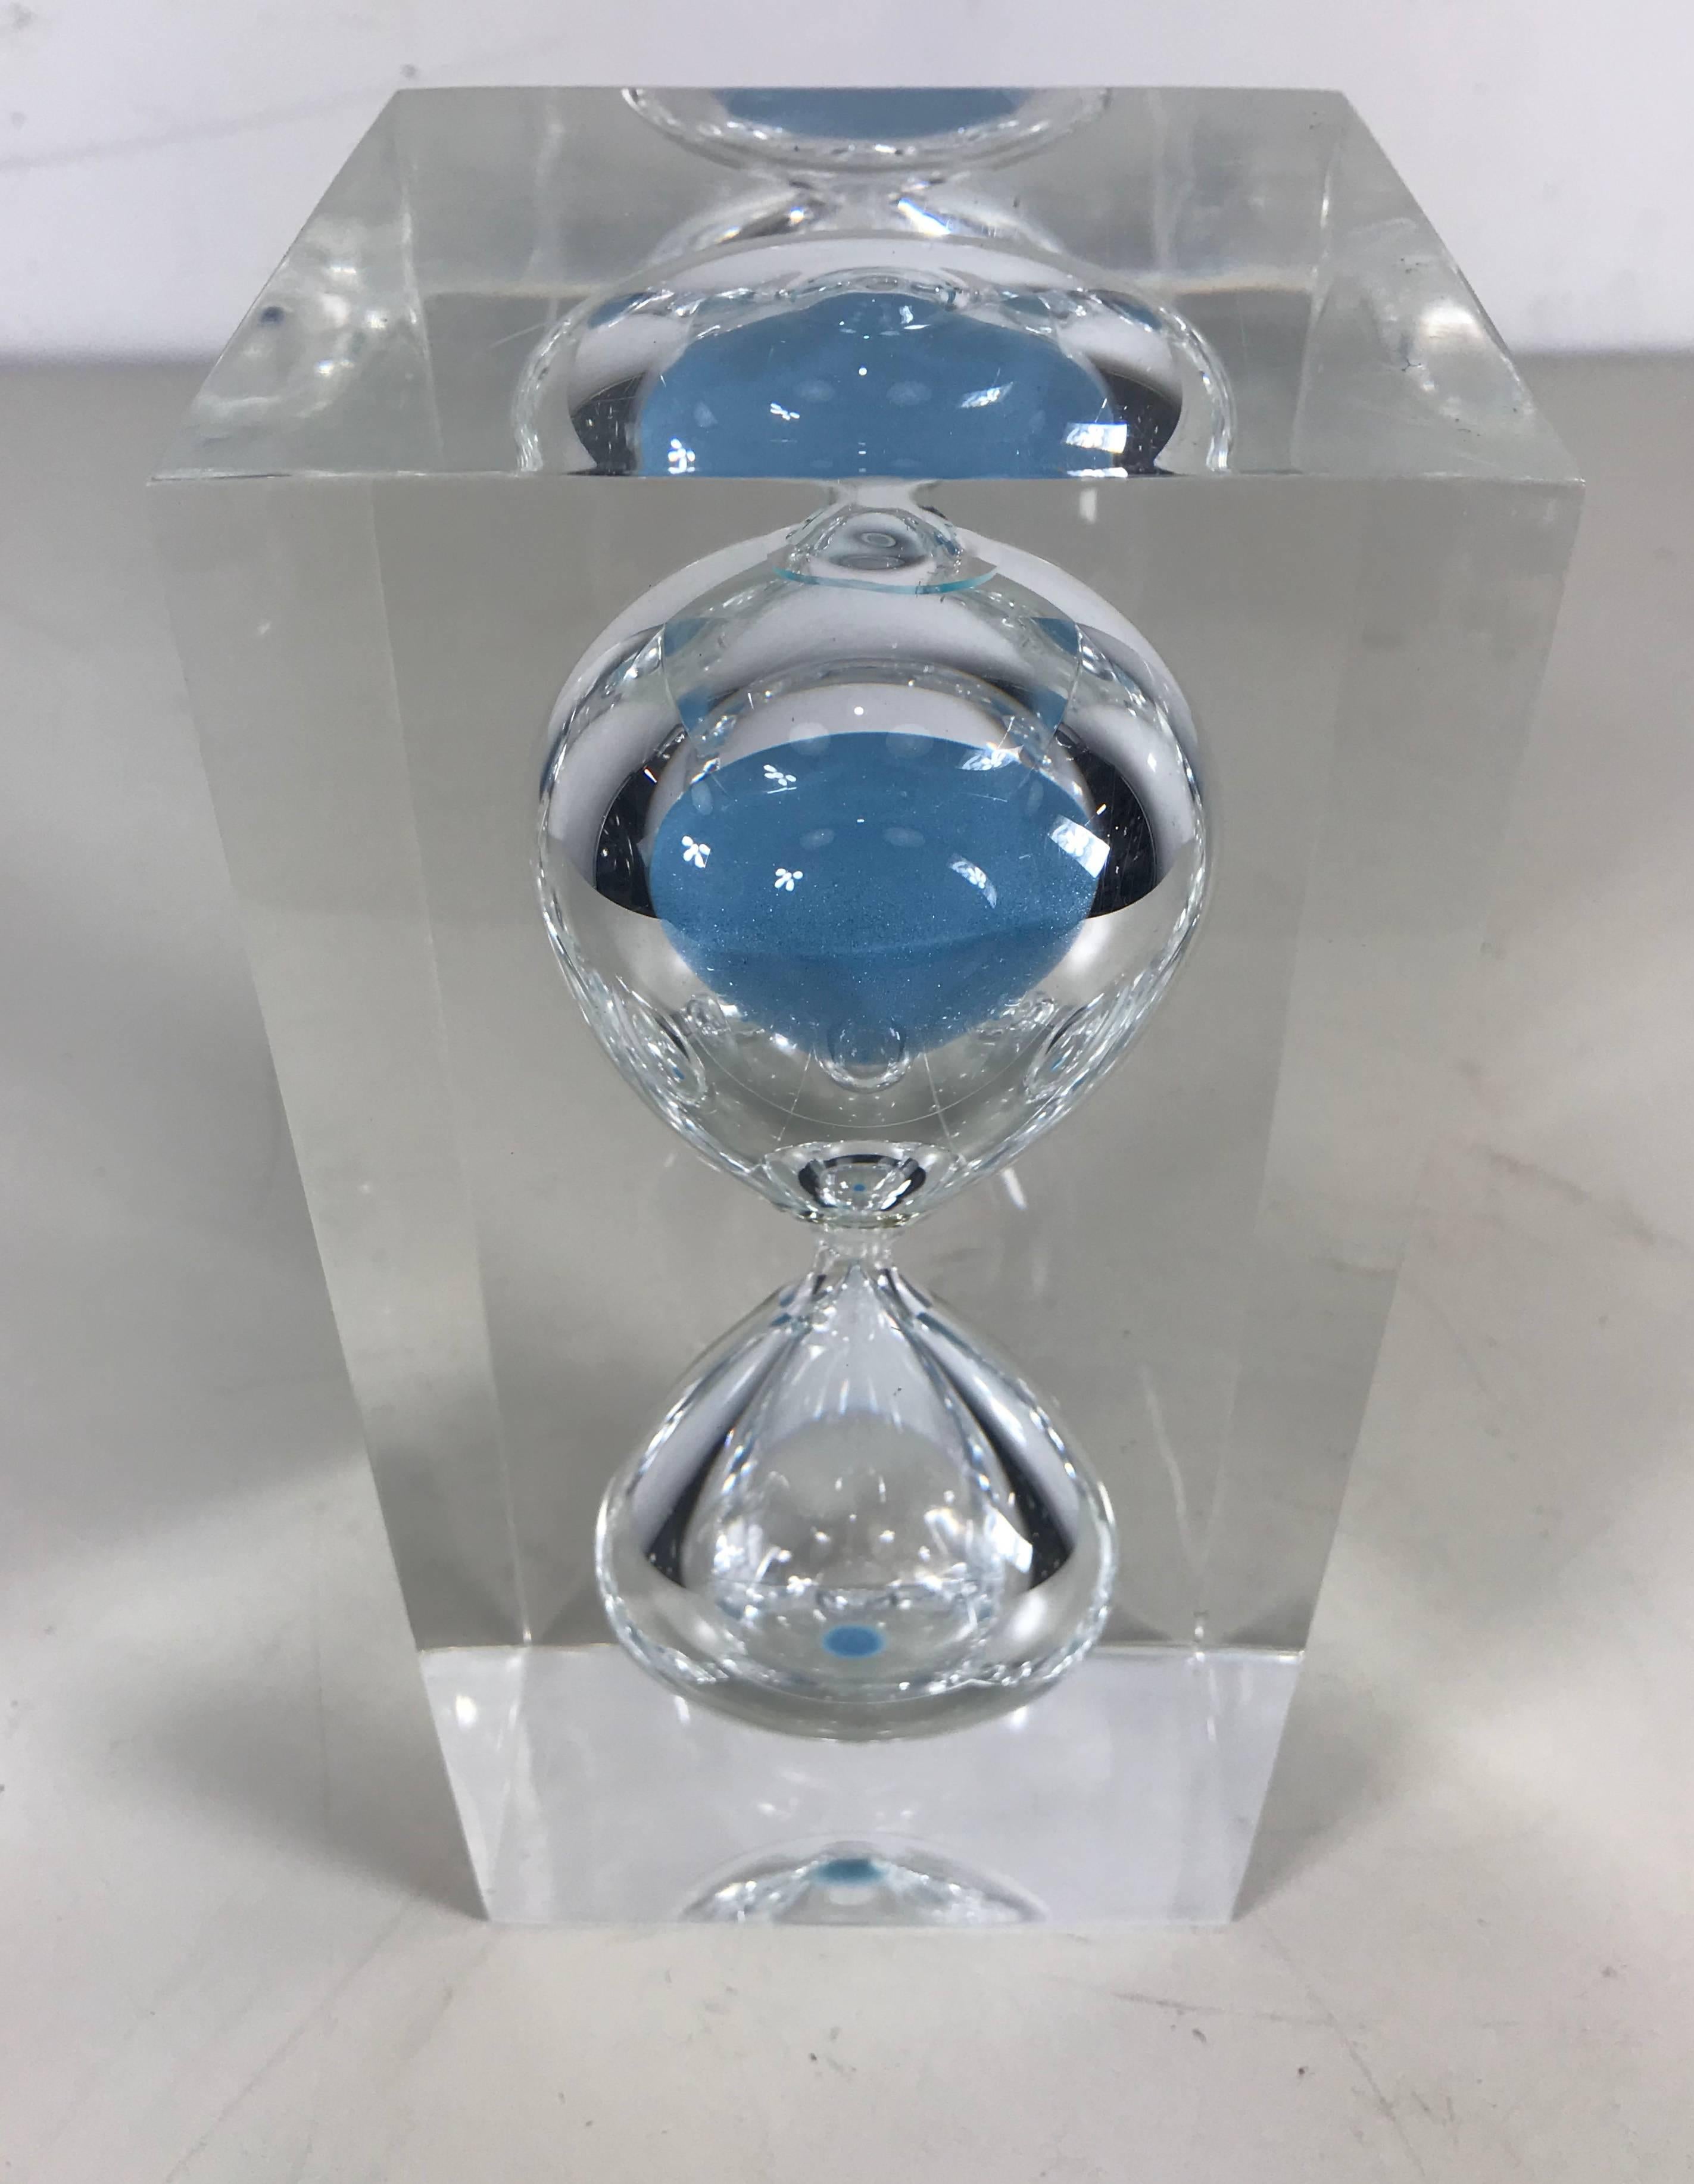 20th Century Modernist Lucite Hourglass Sculpture with Ice Blue Sand, Franco Scuderi